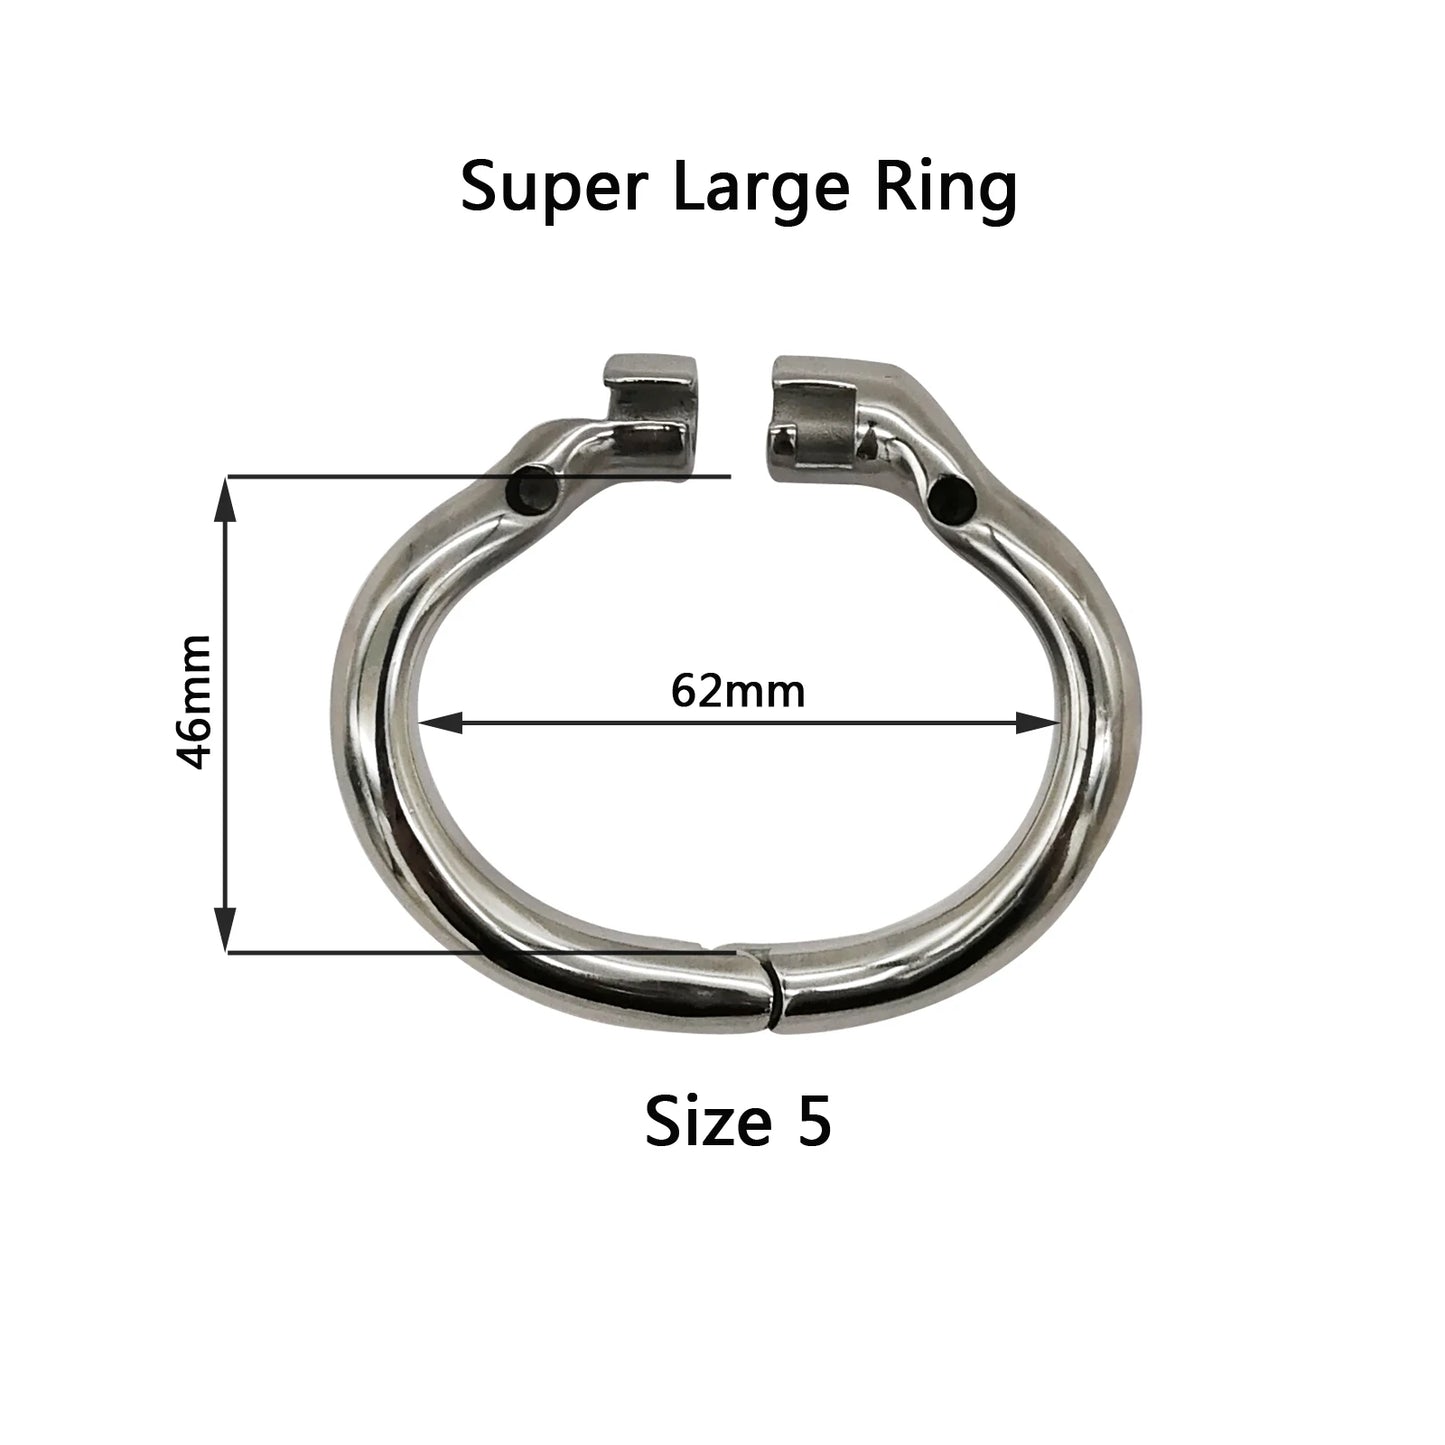 Newest Stainless Steel Male Chastity Device